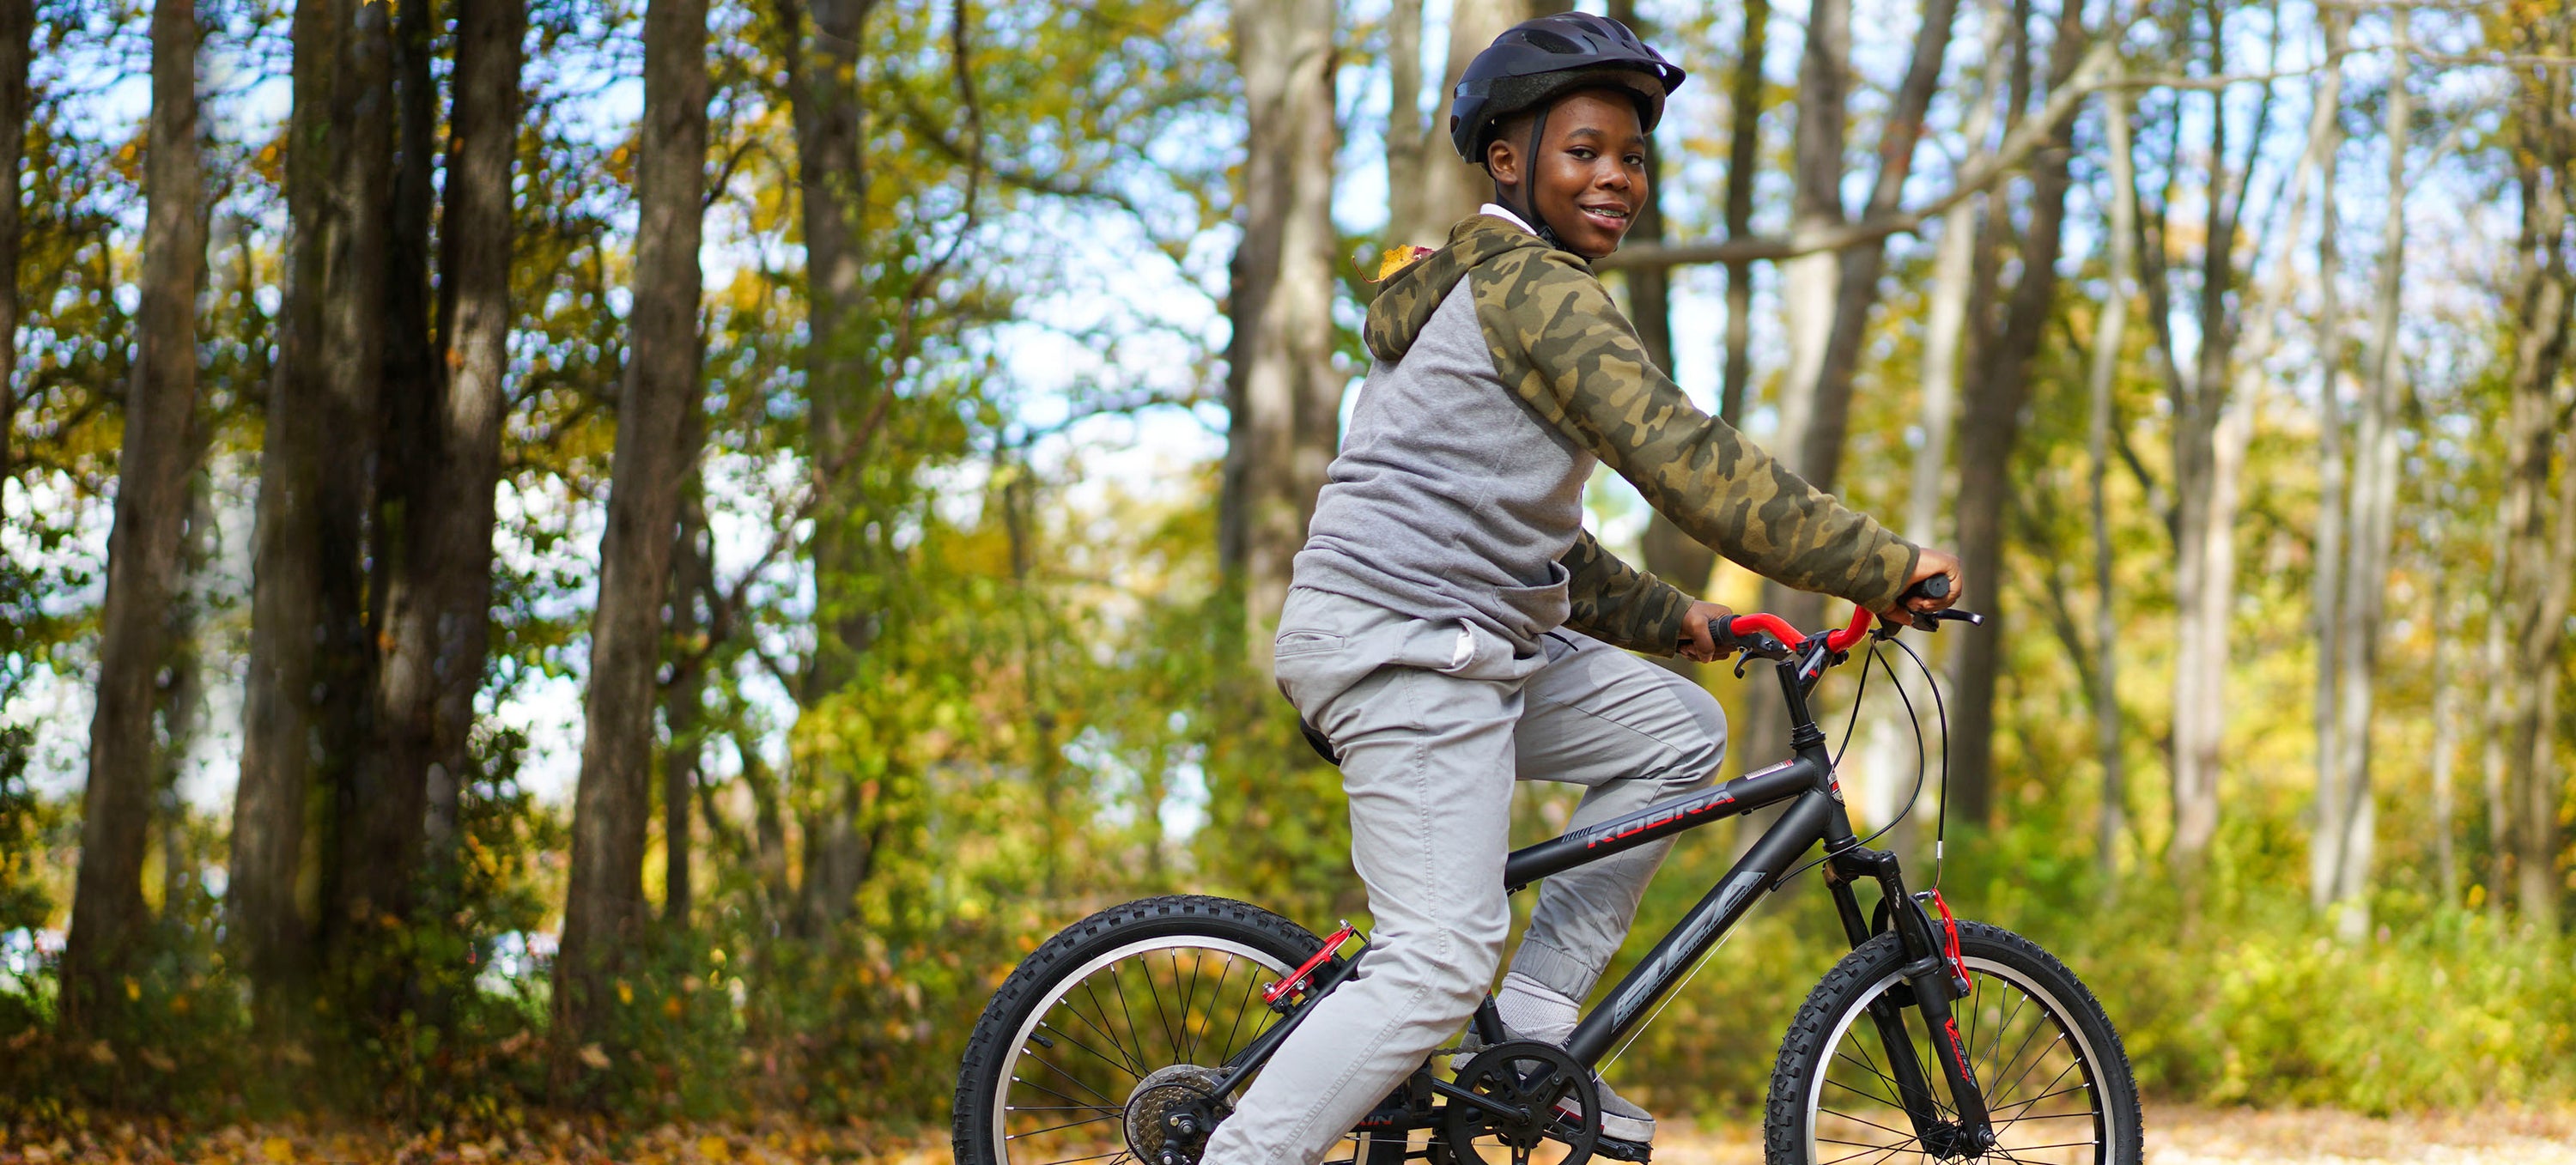 Young boy riding a black kobra in the woods